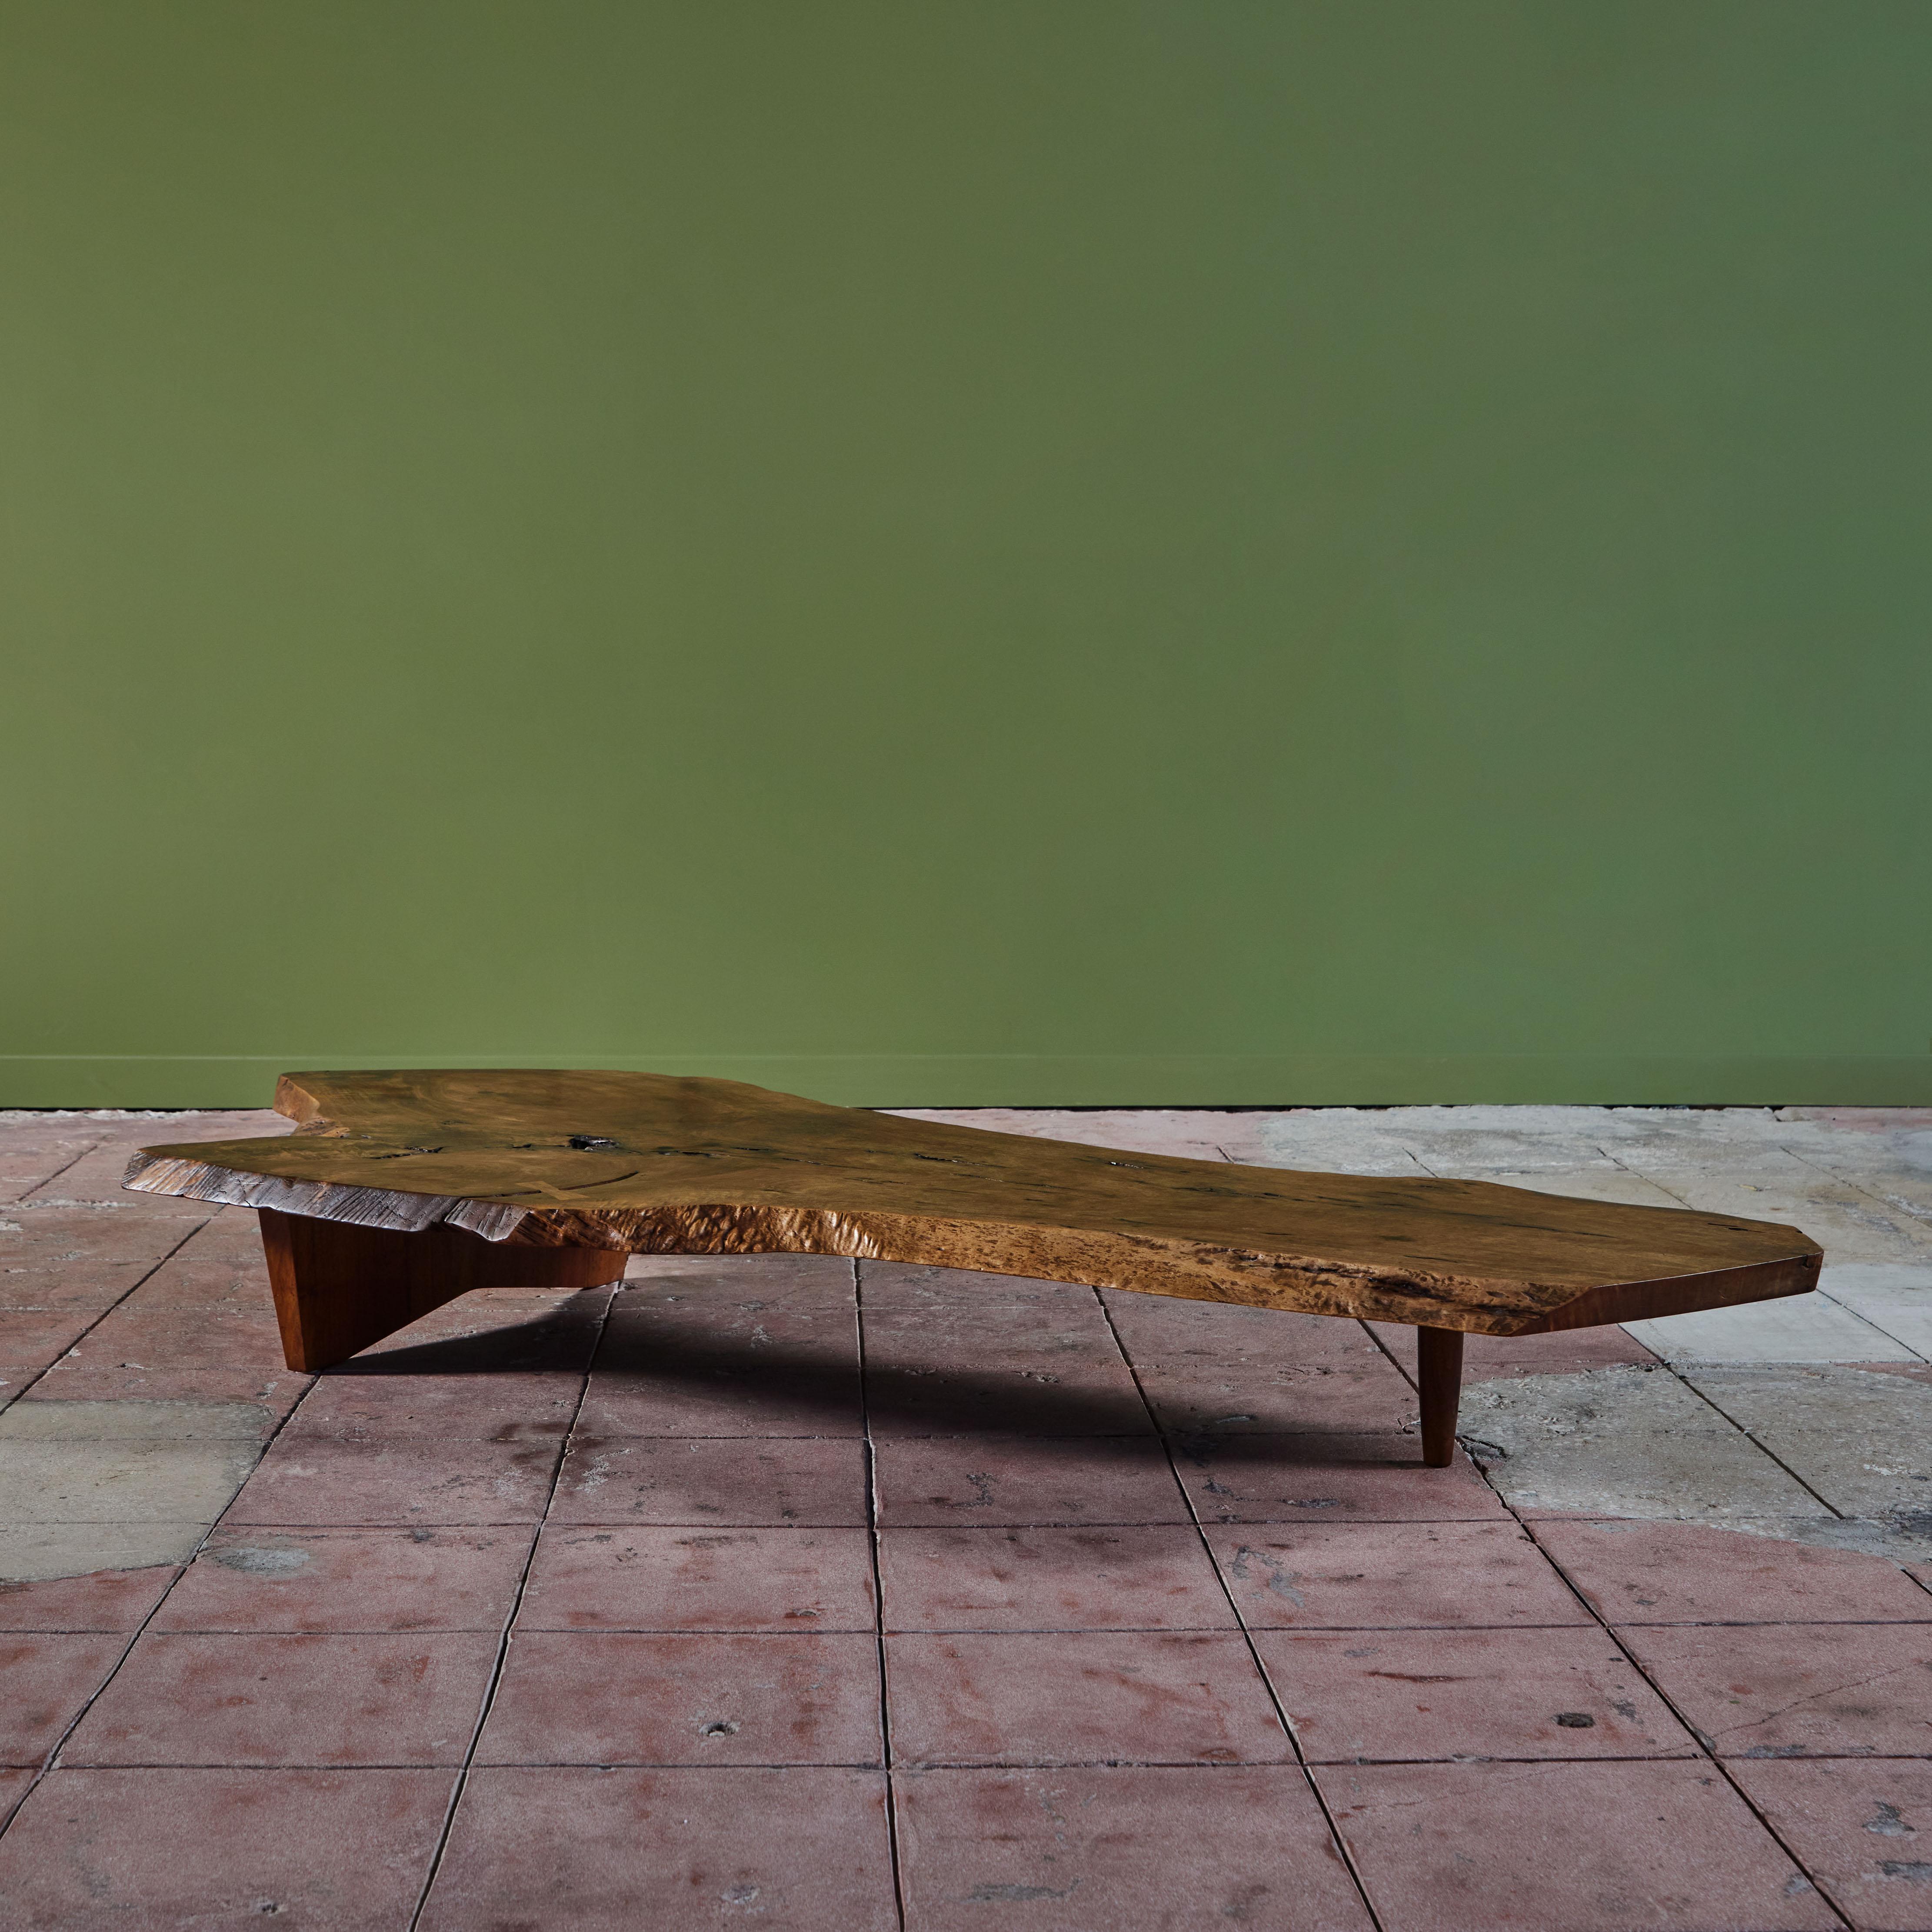 Coffee table from American mid-century craftsman George Nakashima. The table crafted of black walnut, c.1969 features a live edge table top geometric slab base with one tapered leg. Purchased from the original owners and verified by the Nakashima